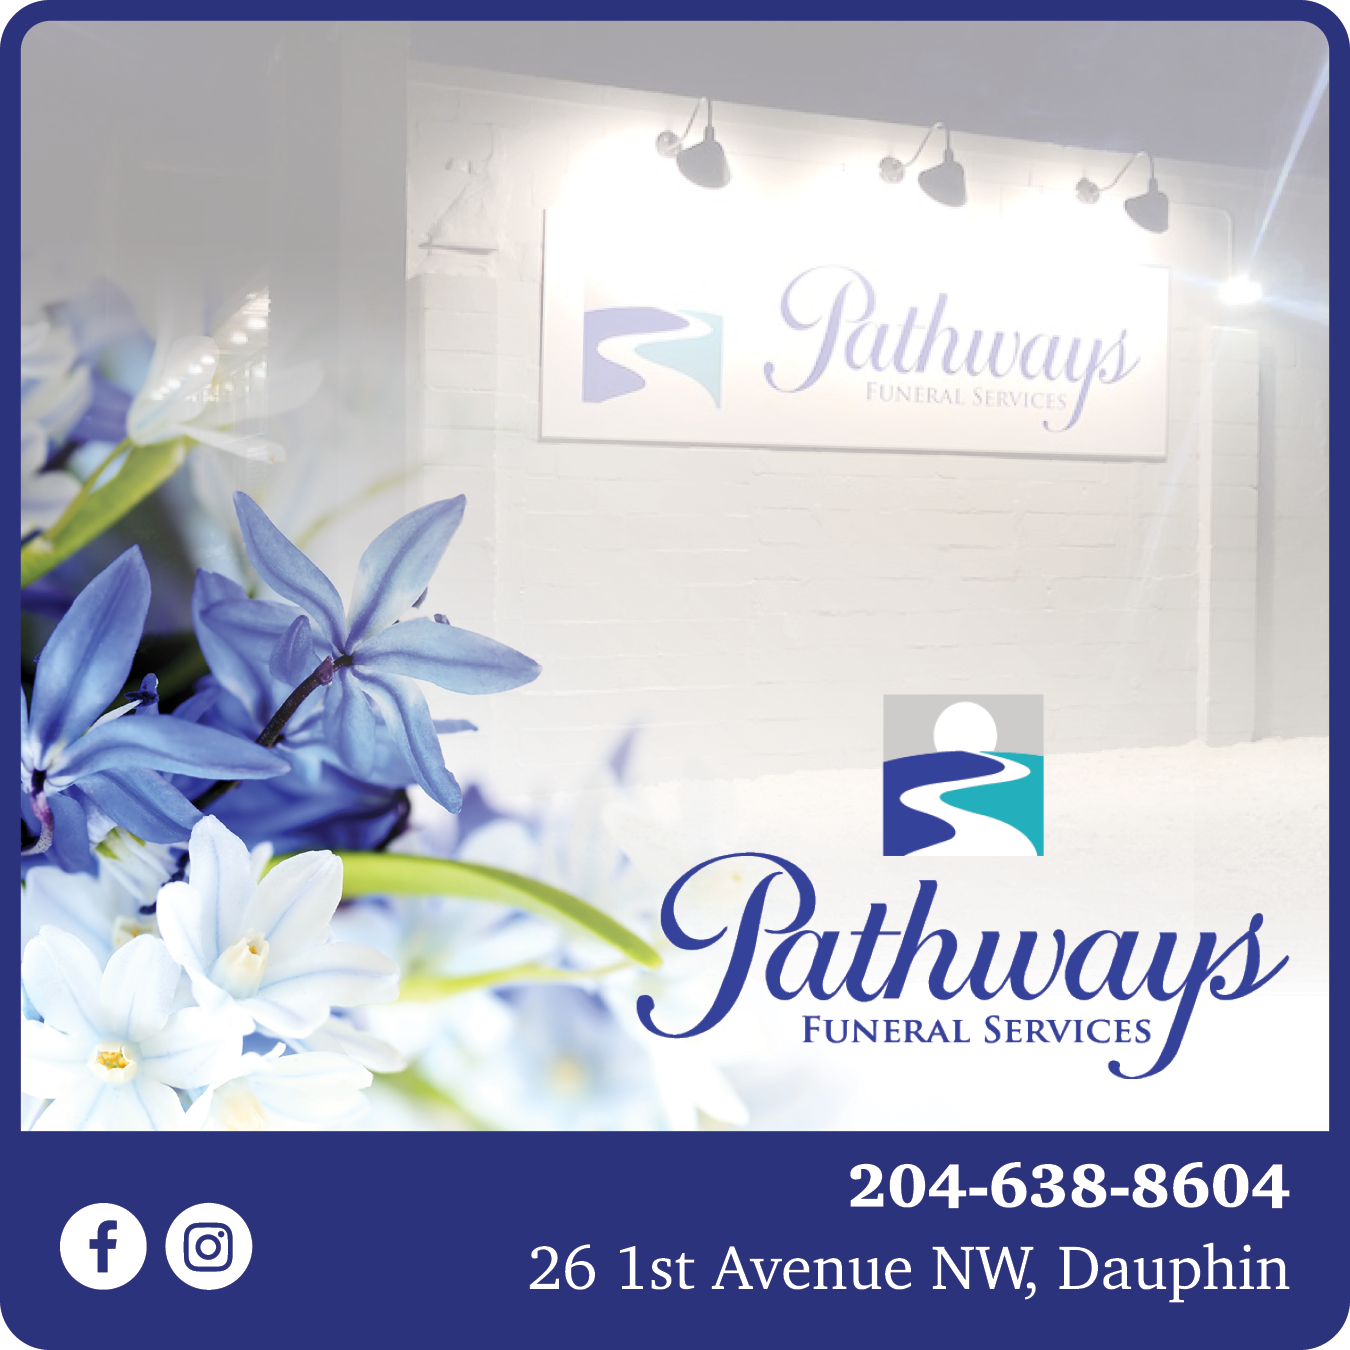 Pathways Funeral Services